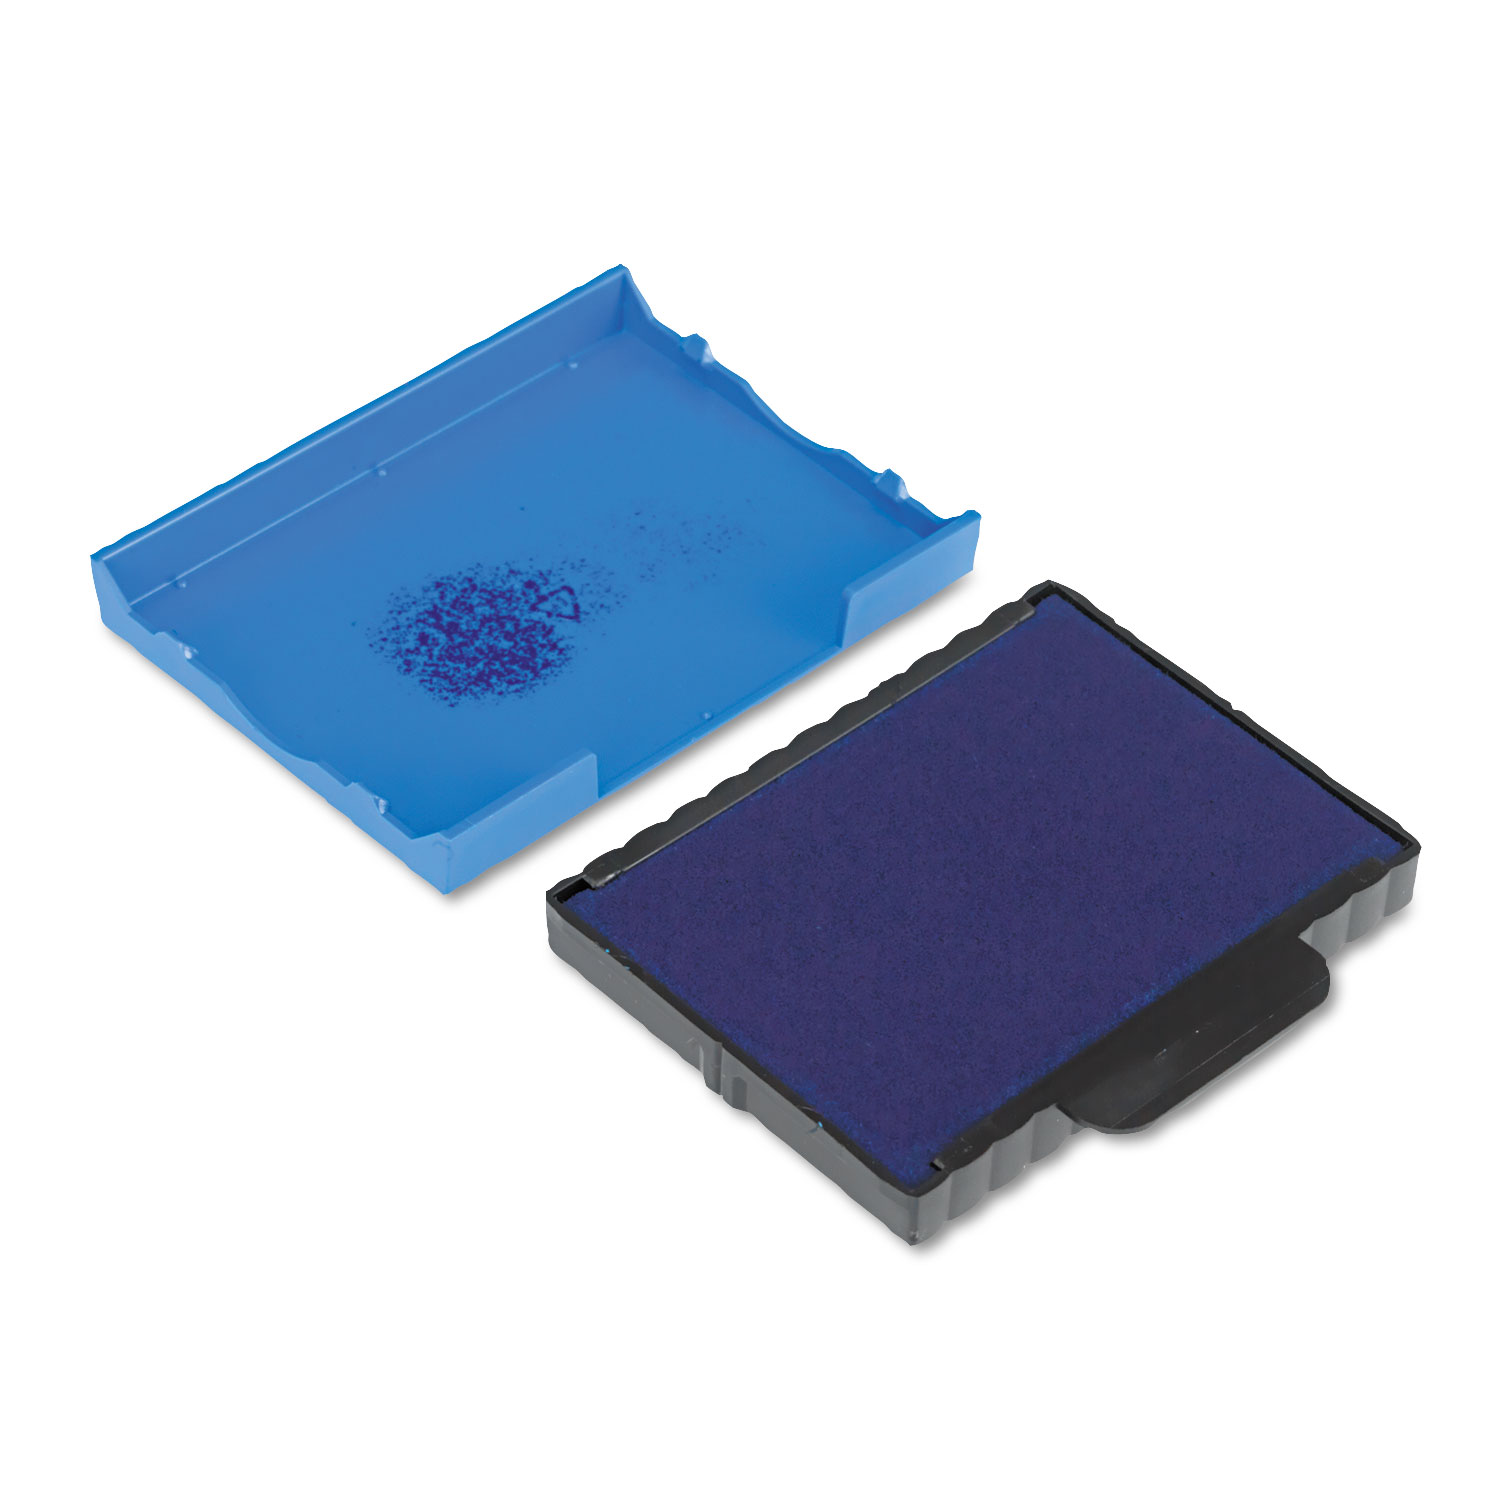 T5470 Dater Replacement Ink Pad, 1 5/8 x 2 1/2, Blue